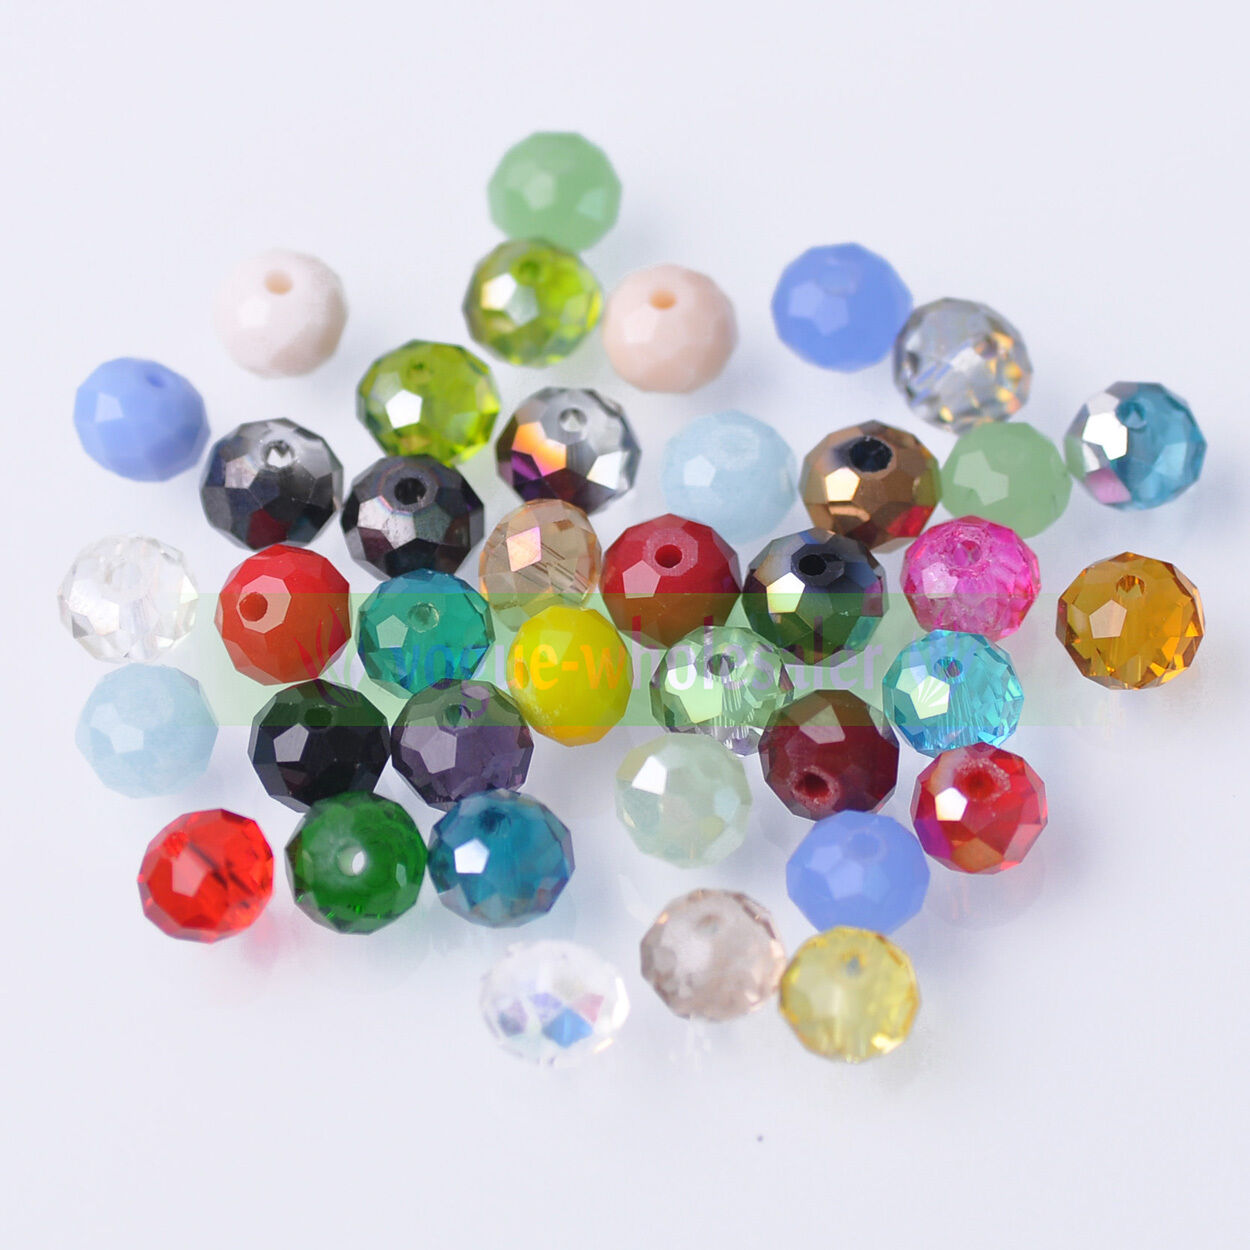 60pcs 8mm Rondelle Faceted Crystal Glass Loose Spacer Beads lot Jewelry Findings